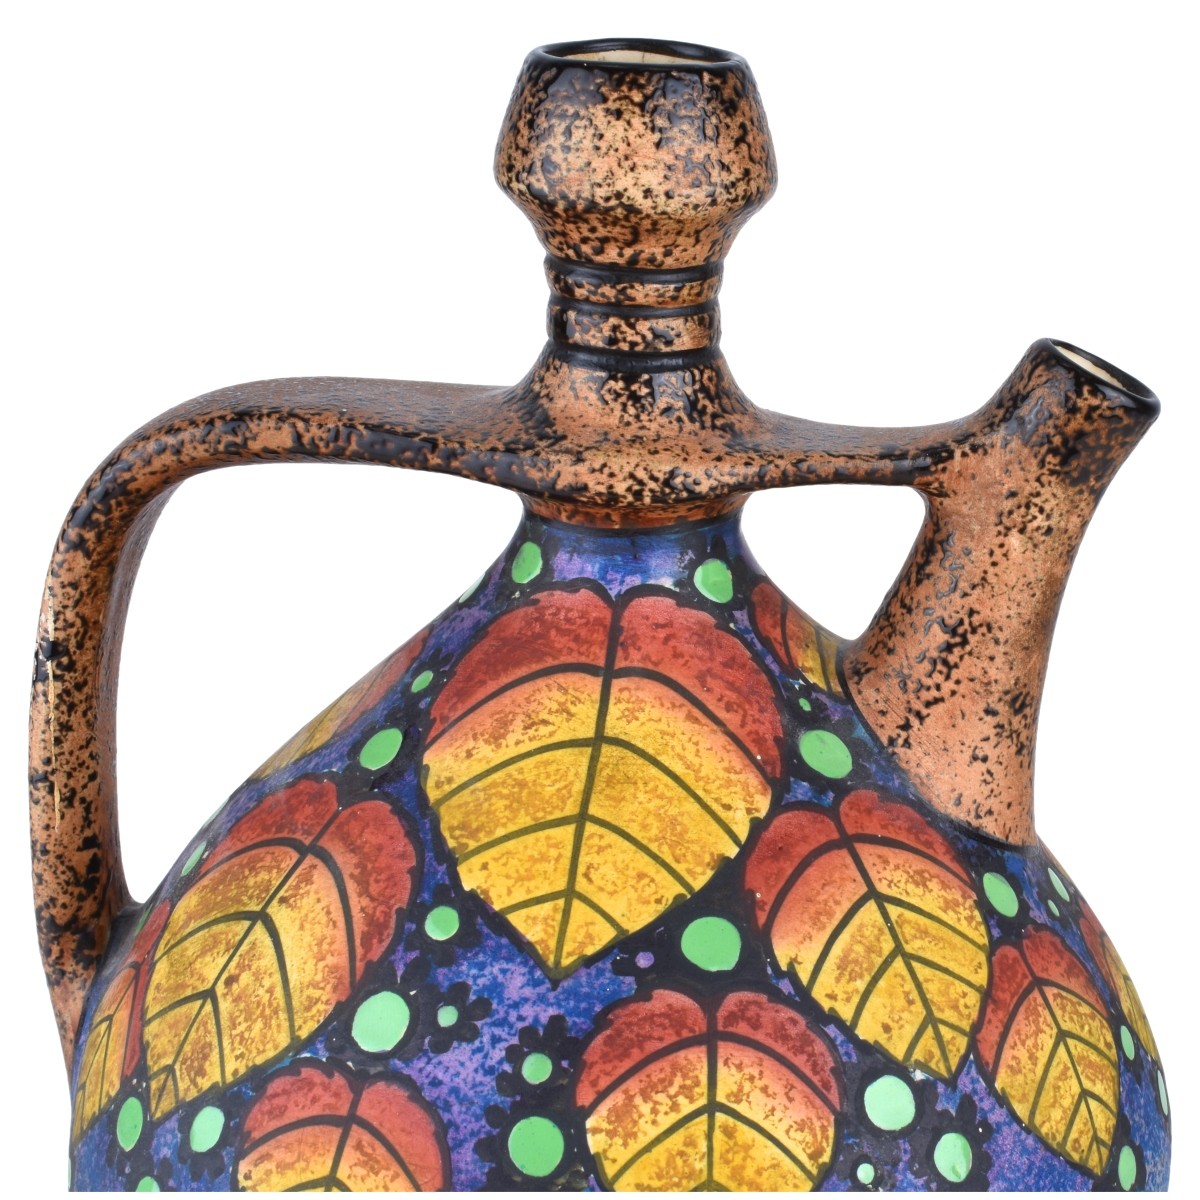 Two Piece Amphora Lot by Paul Dachsel - Image 3 of 6